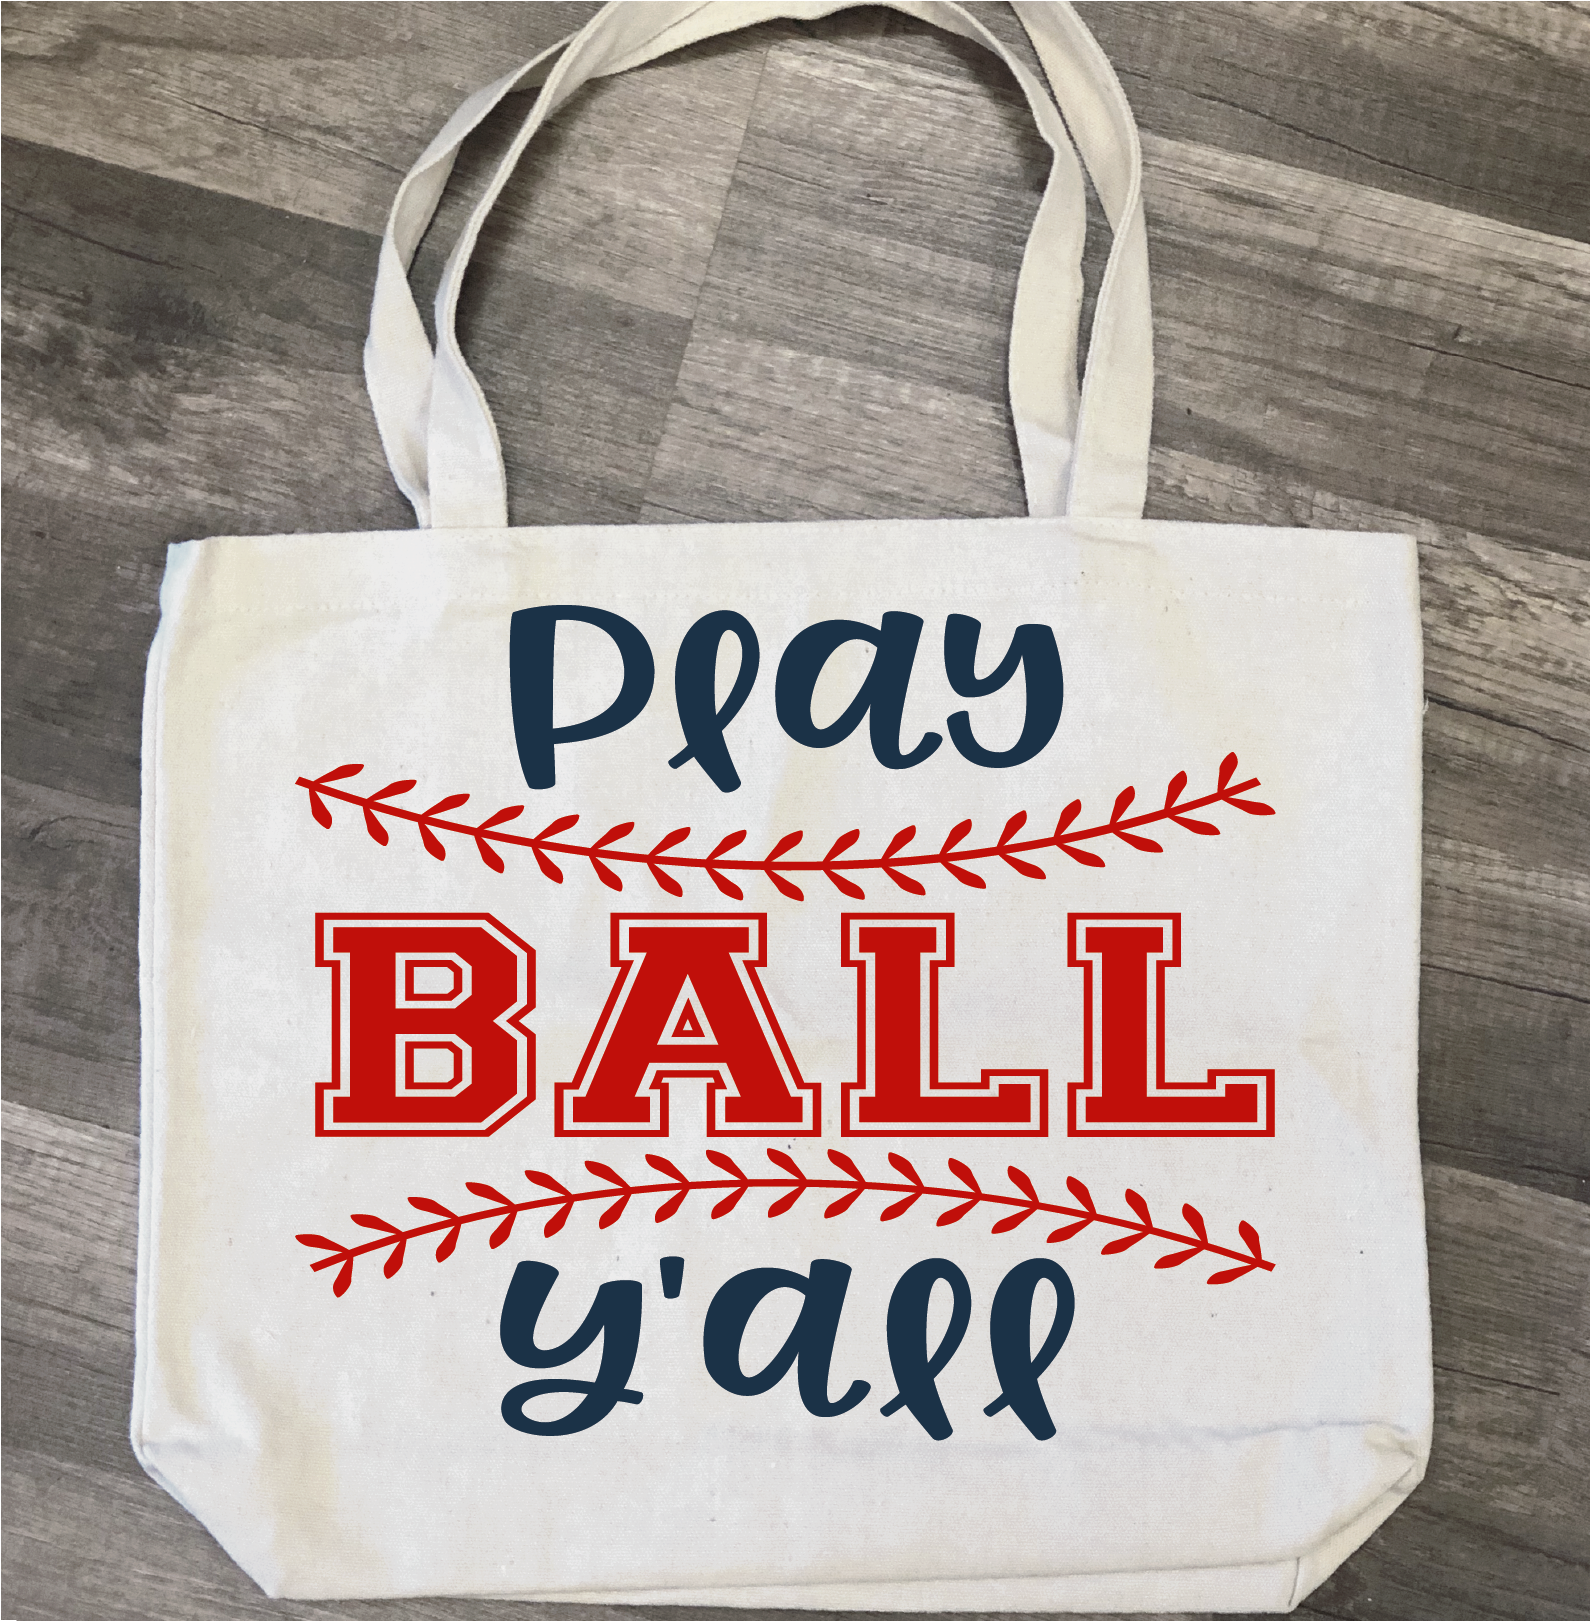 Play Ball Y'all: Canvas Bag - Paisley Grace Makery